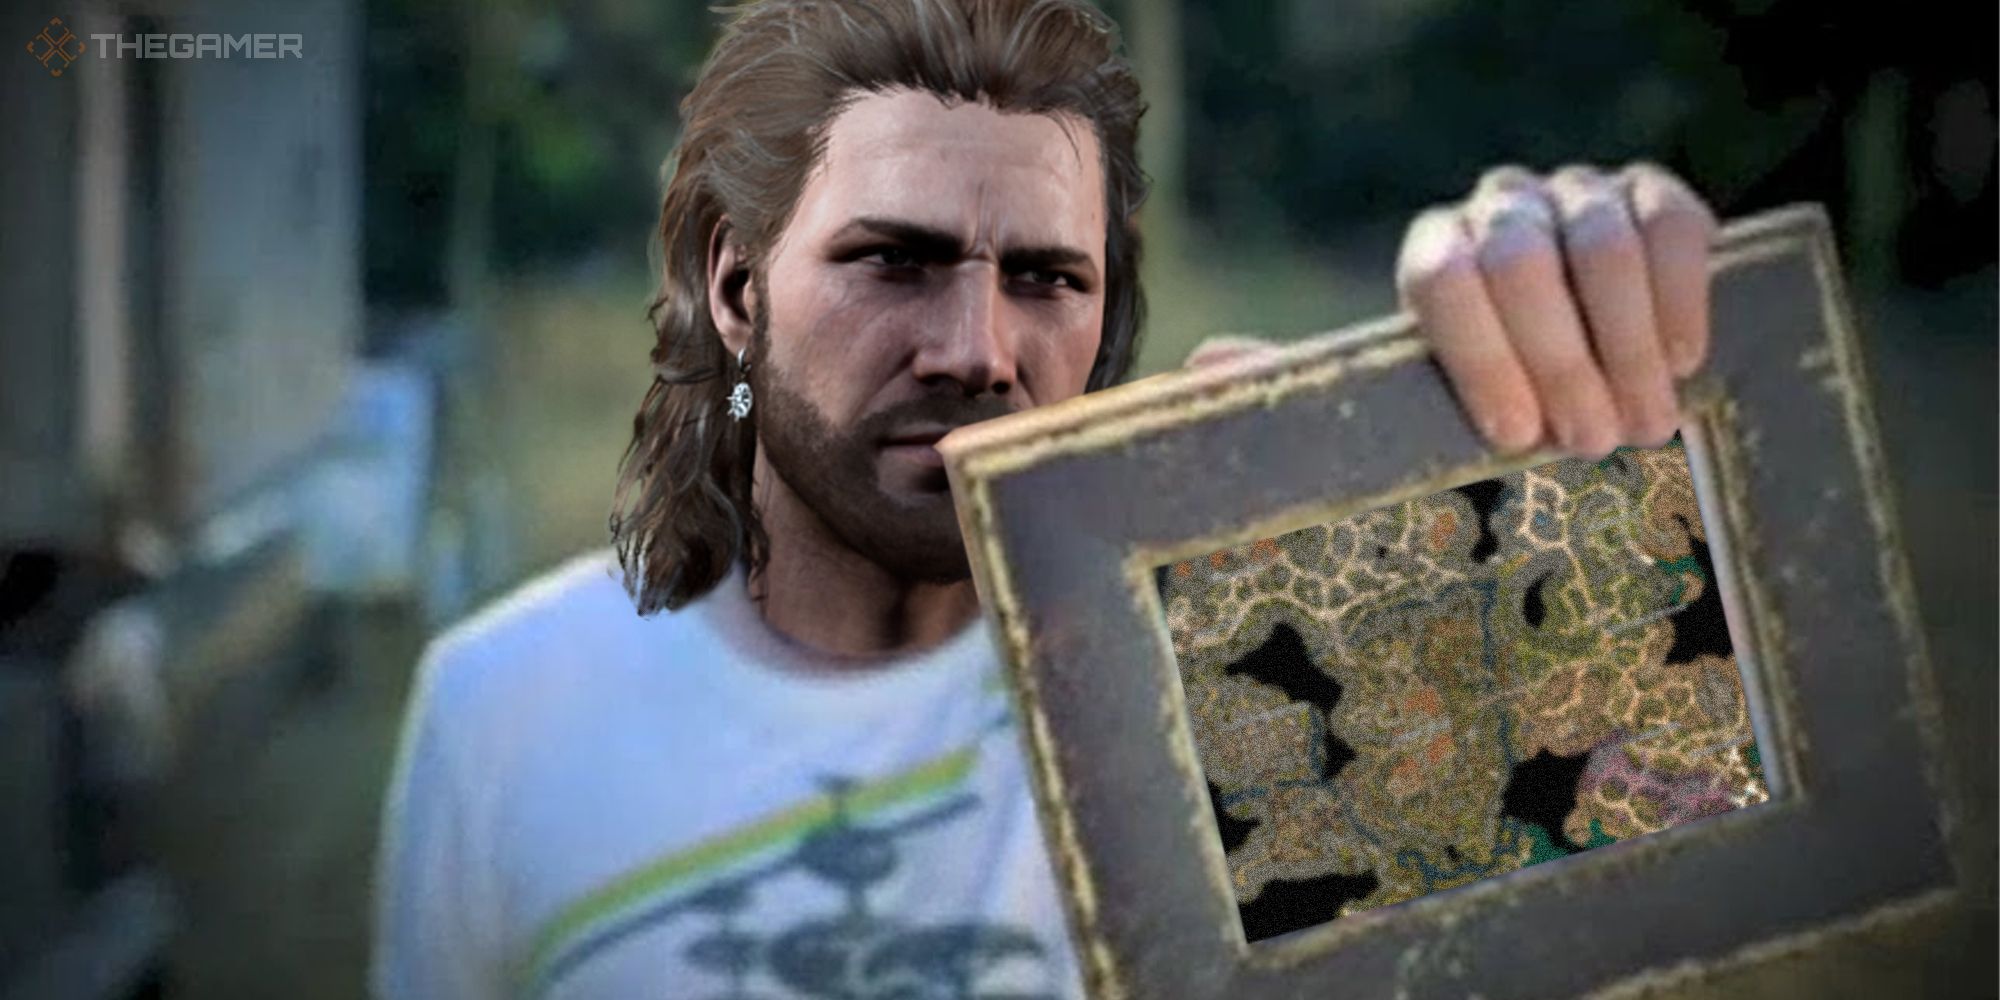 Look at this photograph meme but its Gale from Baldurs Gate  3 holding up a map of act 1